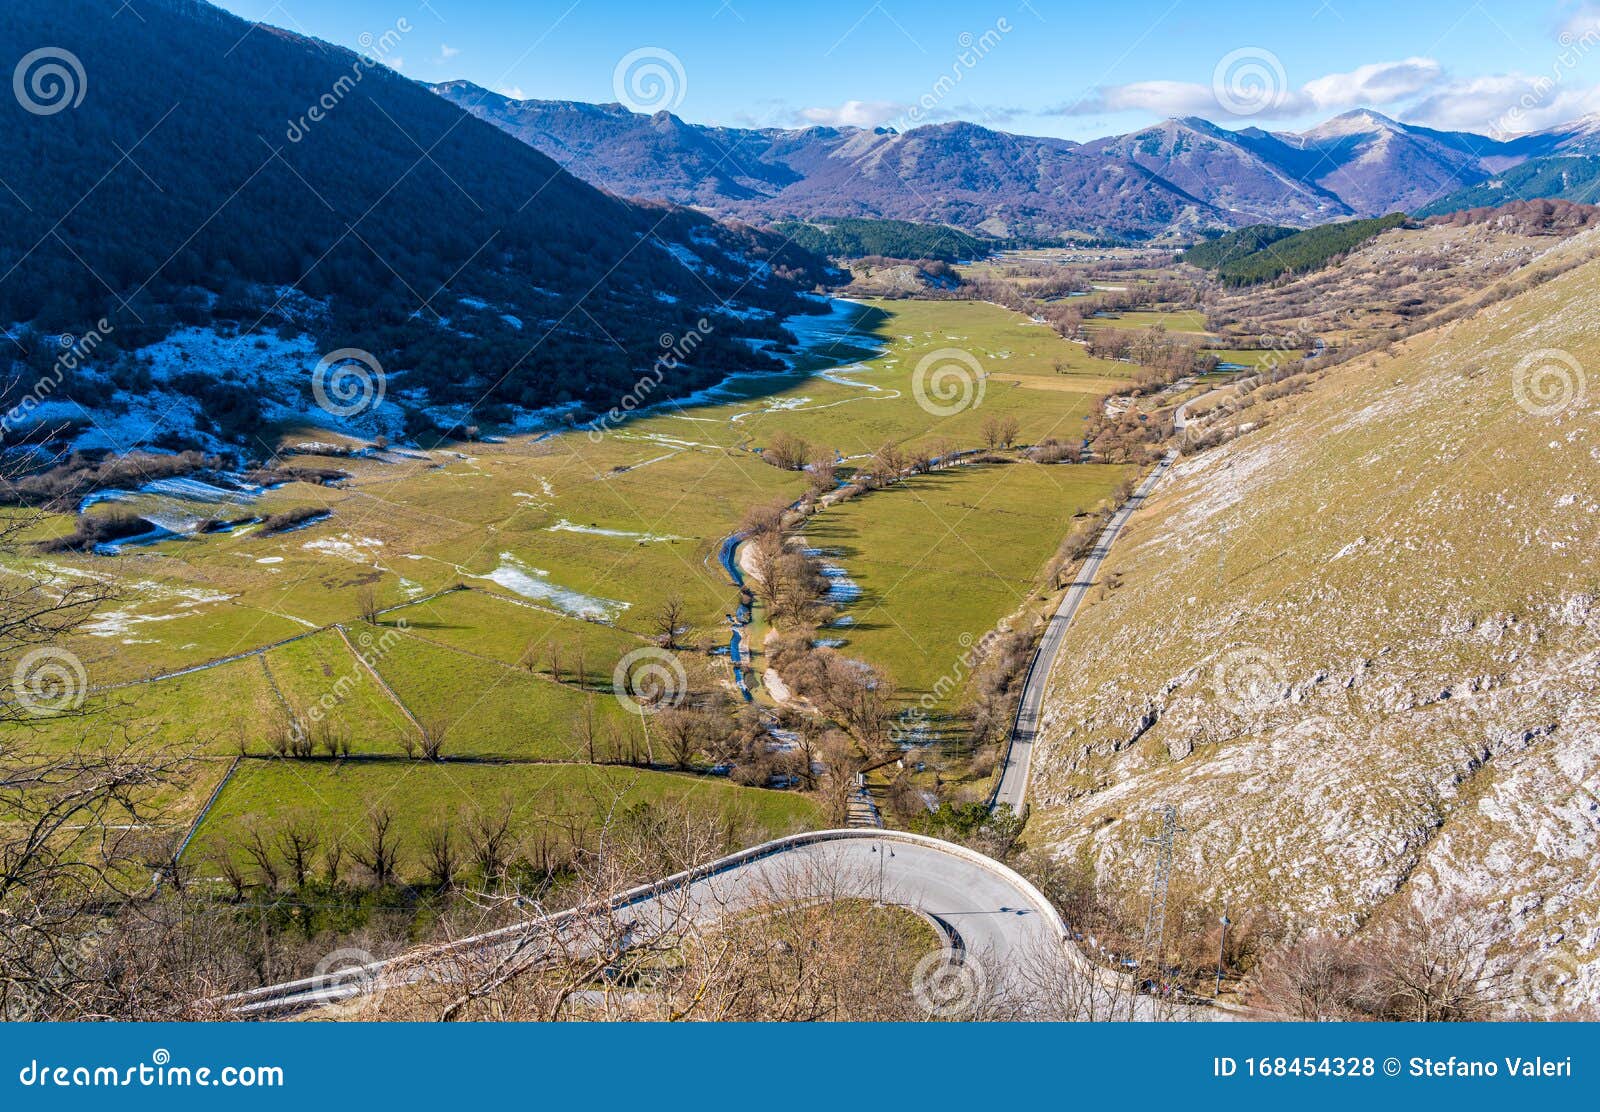 panoramic winter sight from opi, beautiful village in the abruzzo region of italy.